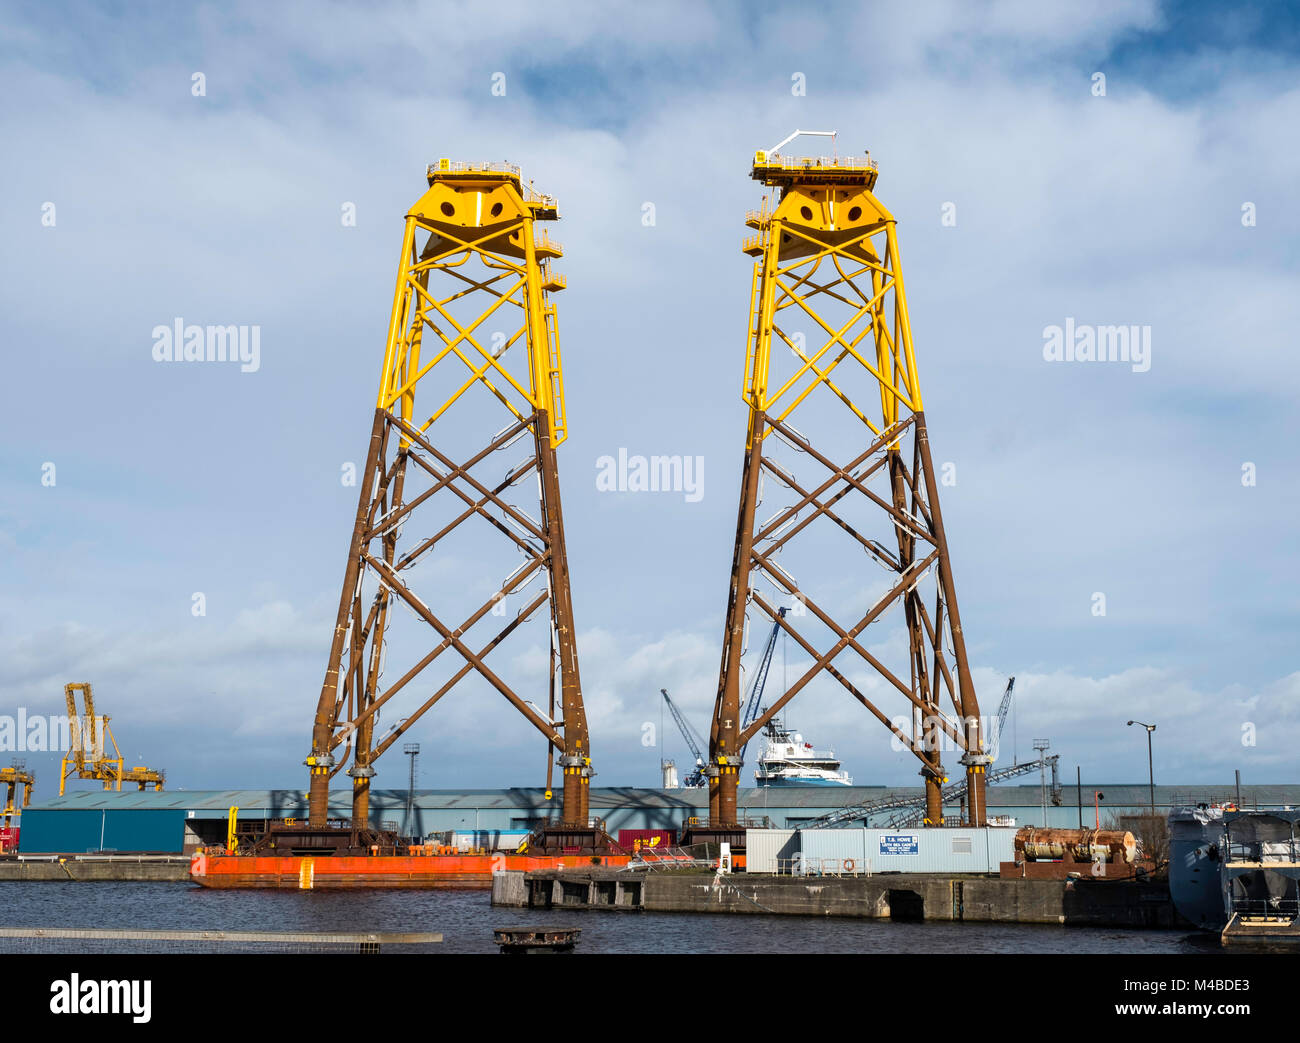 Large sub-sea platforms await delivery to Beatrice offshore wind farm in the North Sea.  They were fabricated by Bifab, Burntisland Fabrications Ltd f Stock Photo